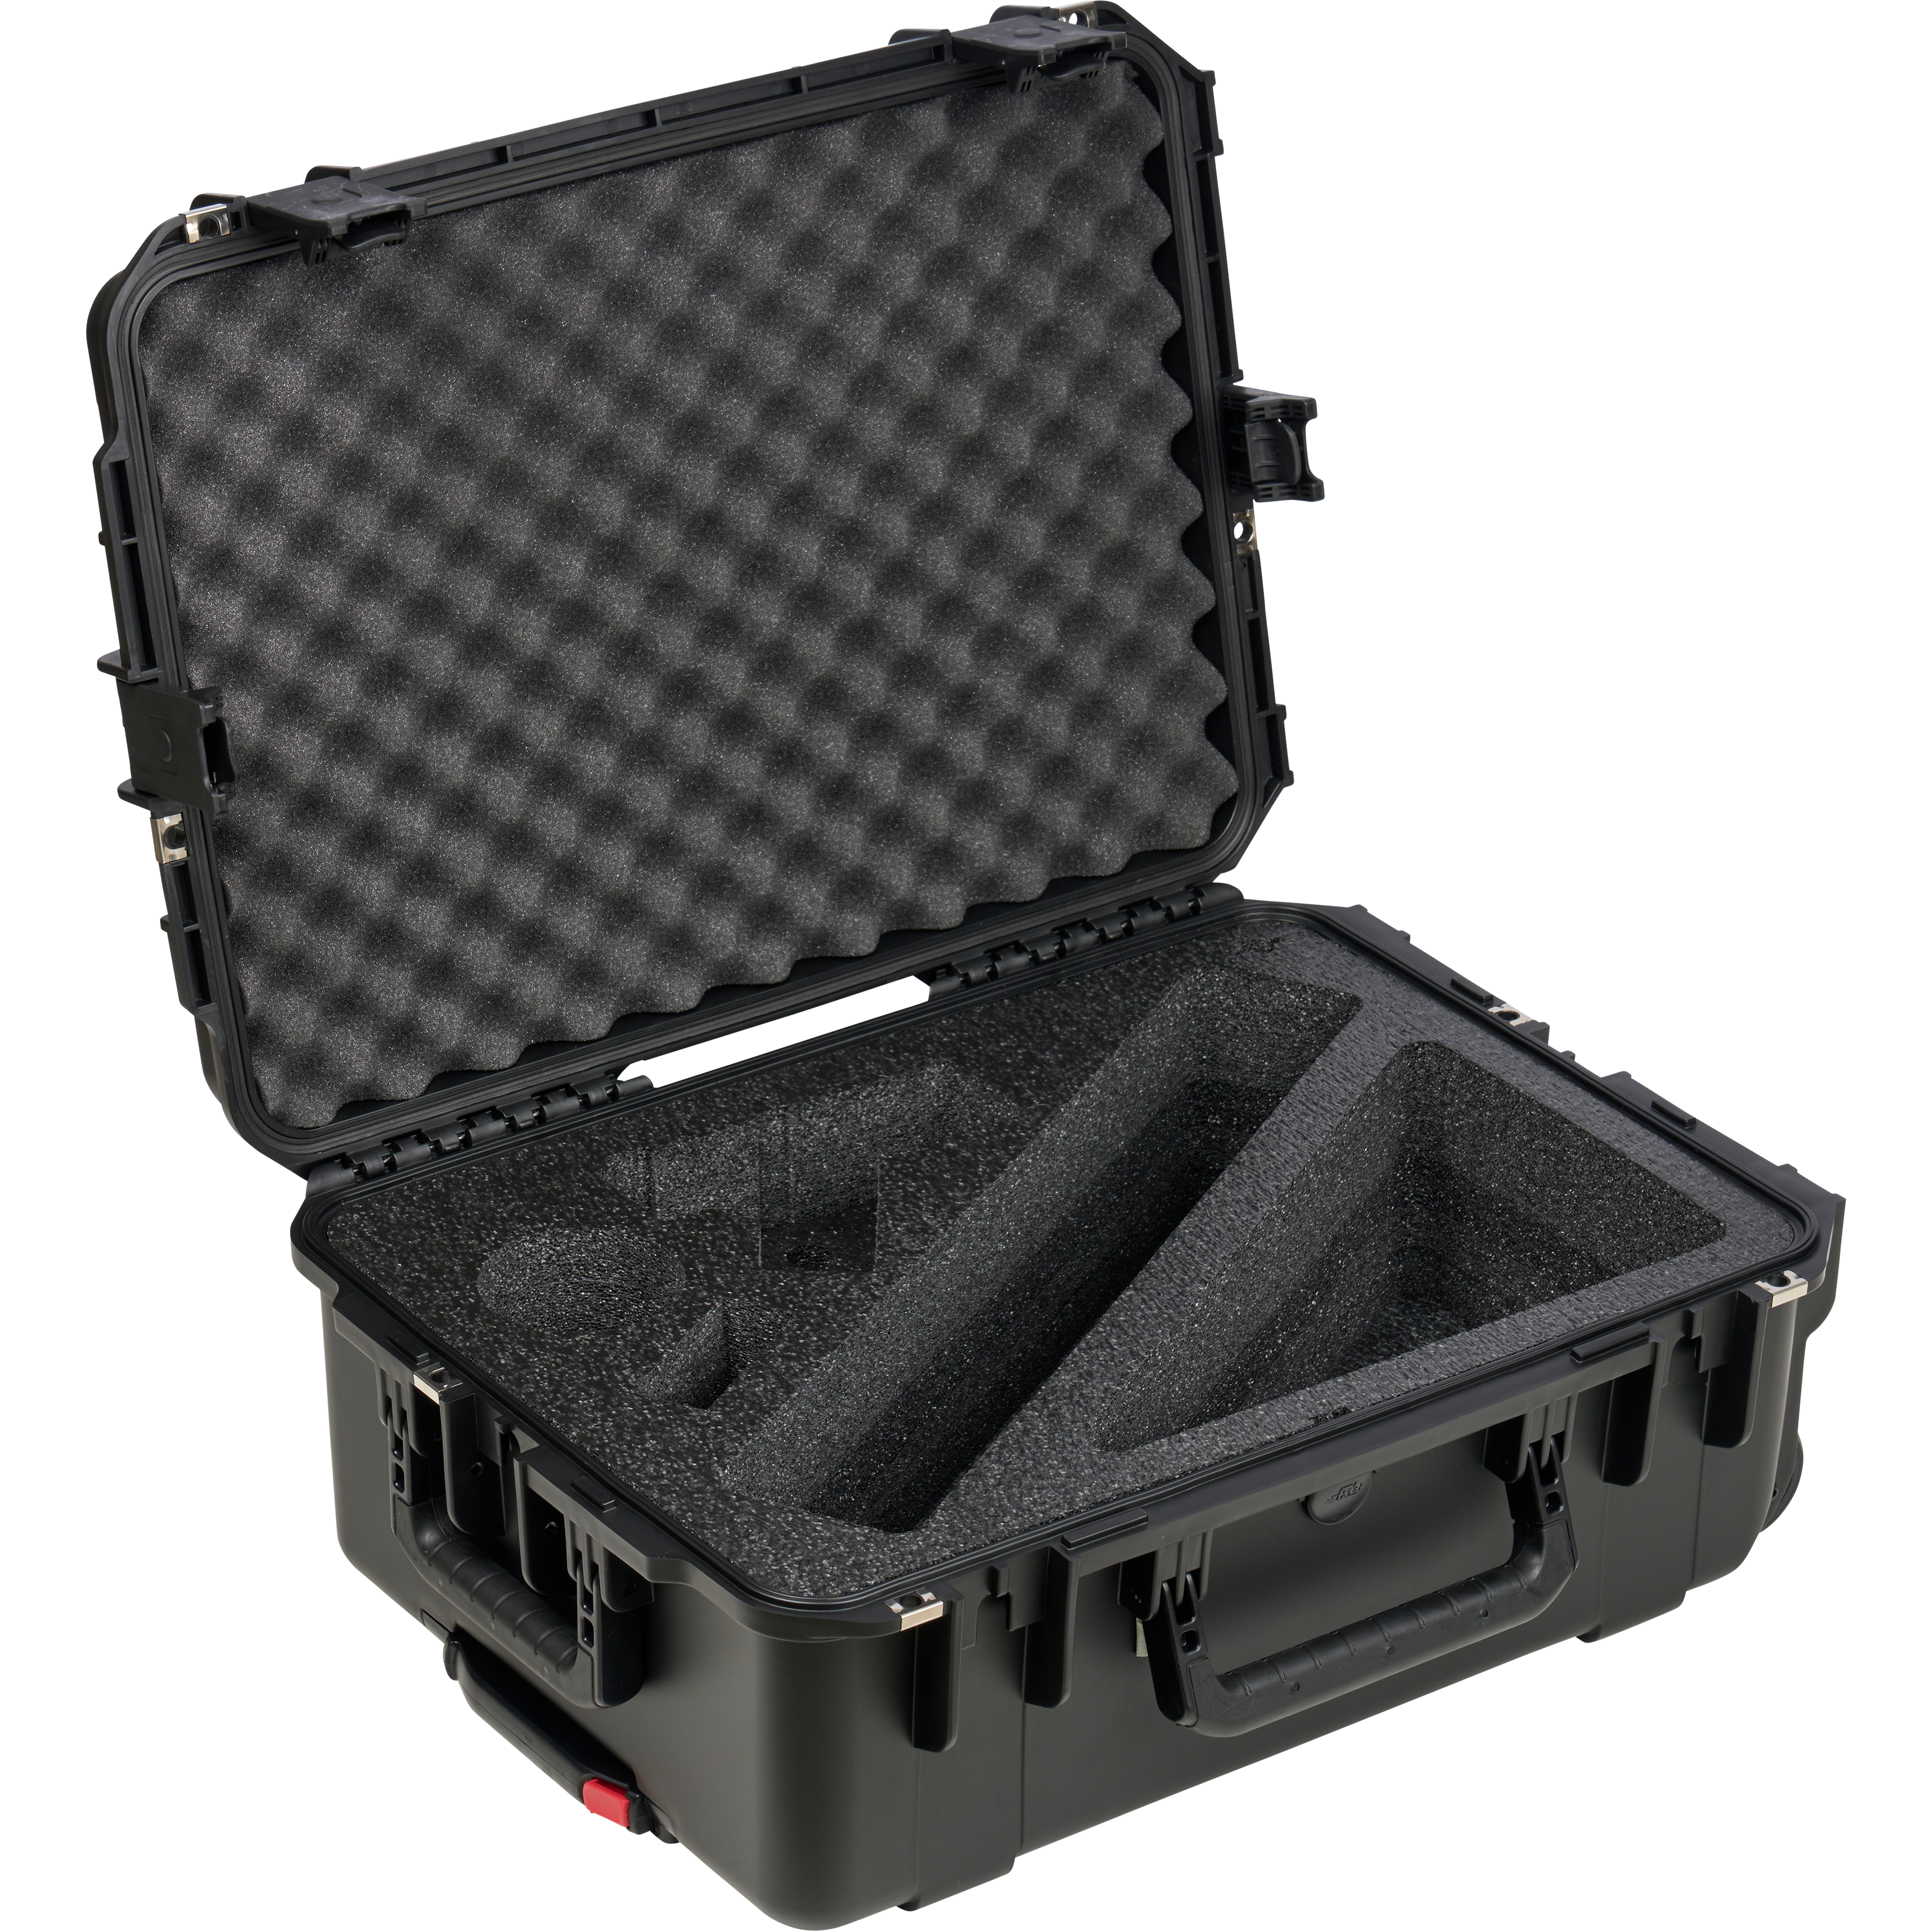 BYFP ipCase for Shure SM7B Broadcast Pack